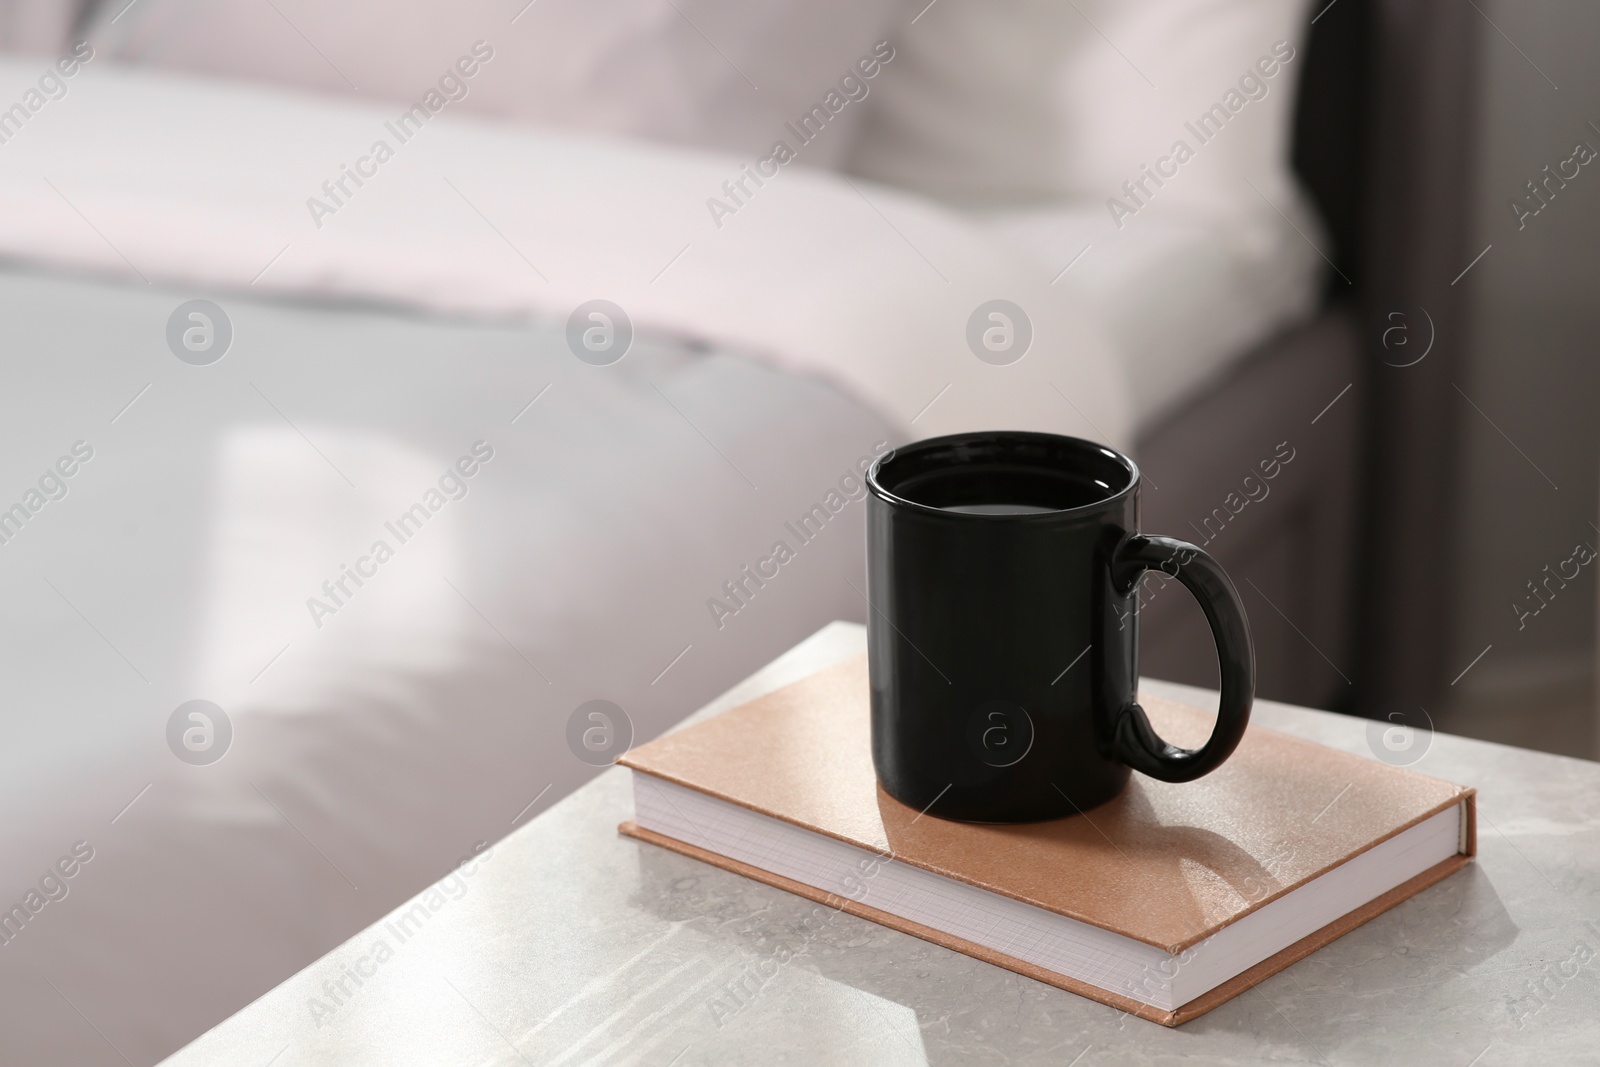 Photo of Black ceramic mug and book on table indoors. Mockup for design